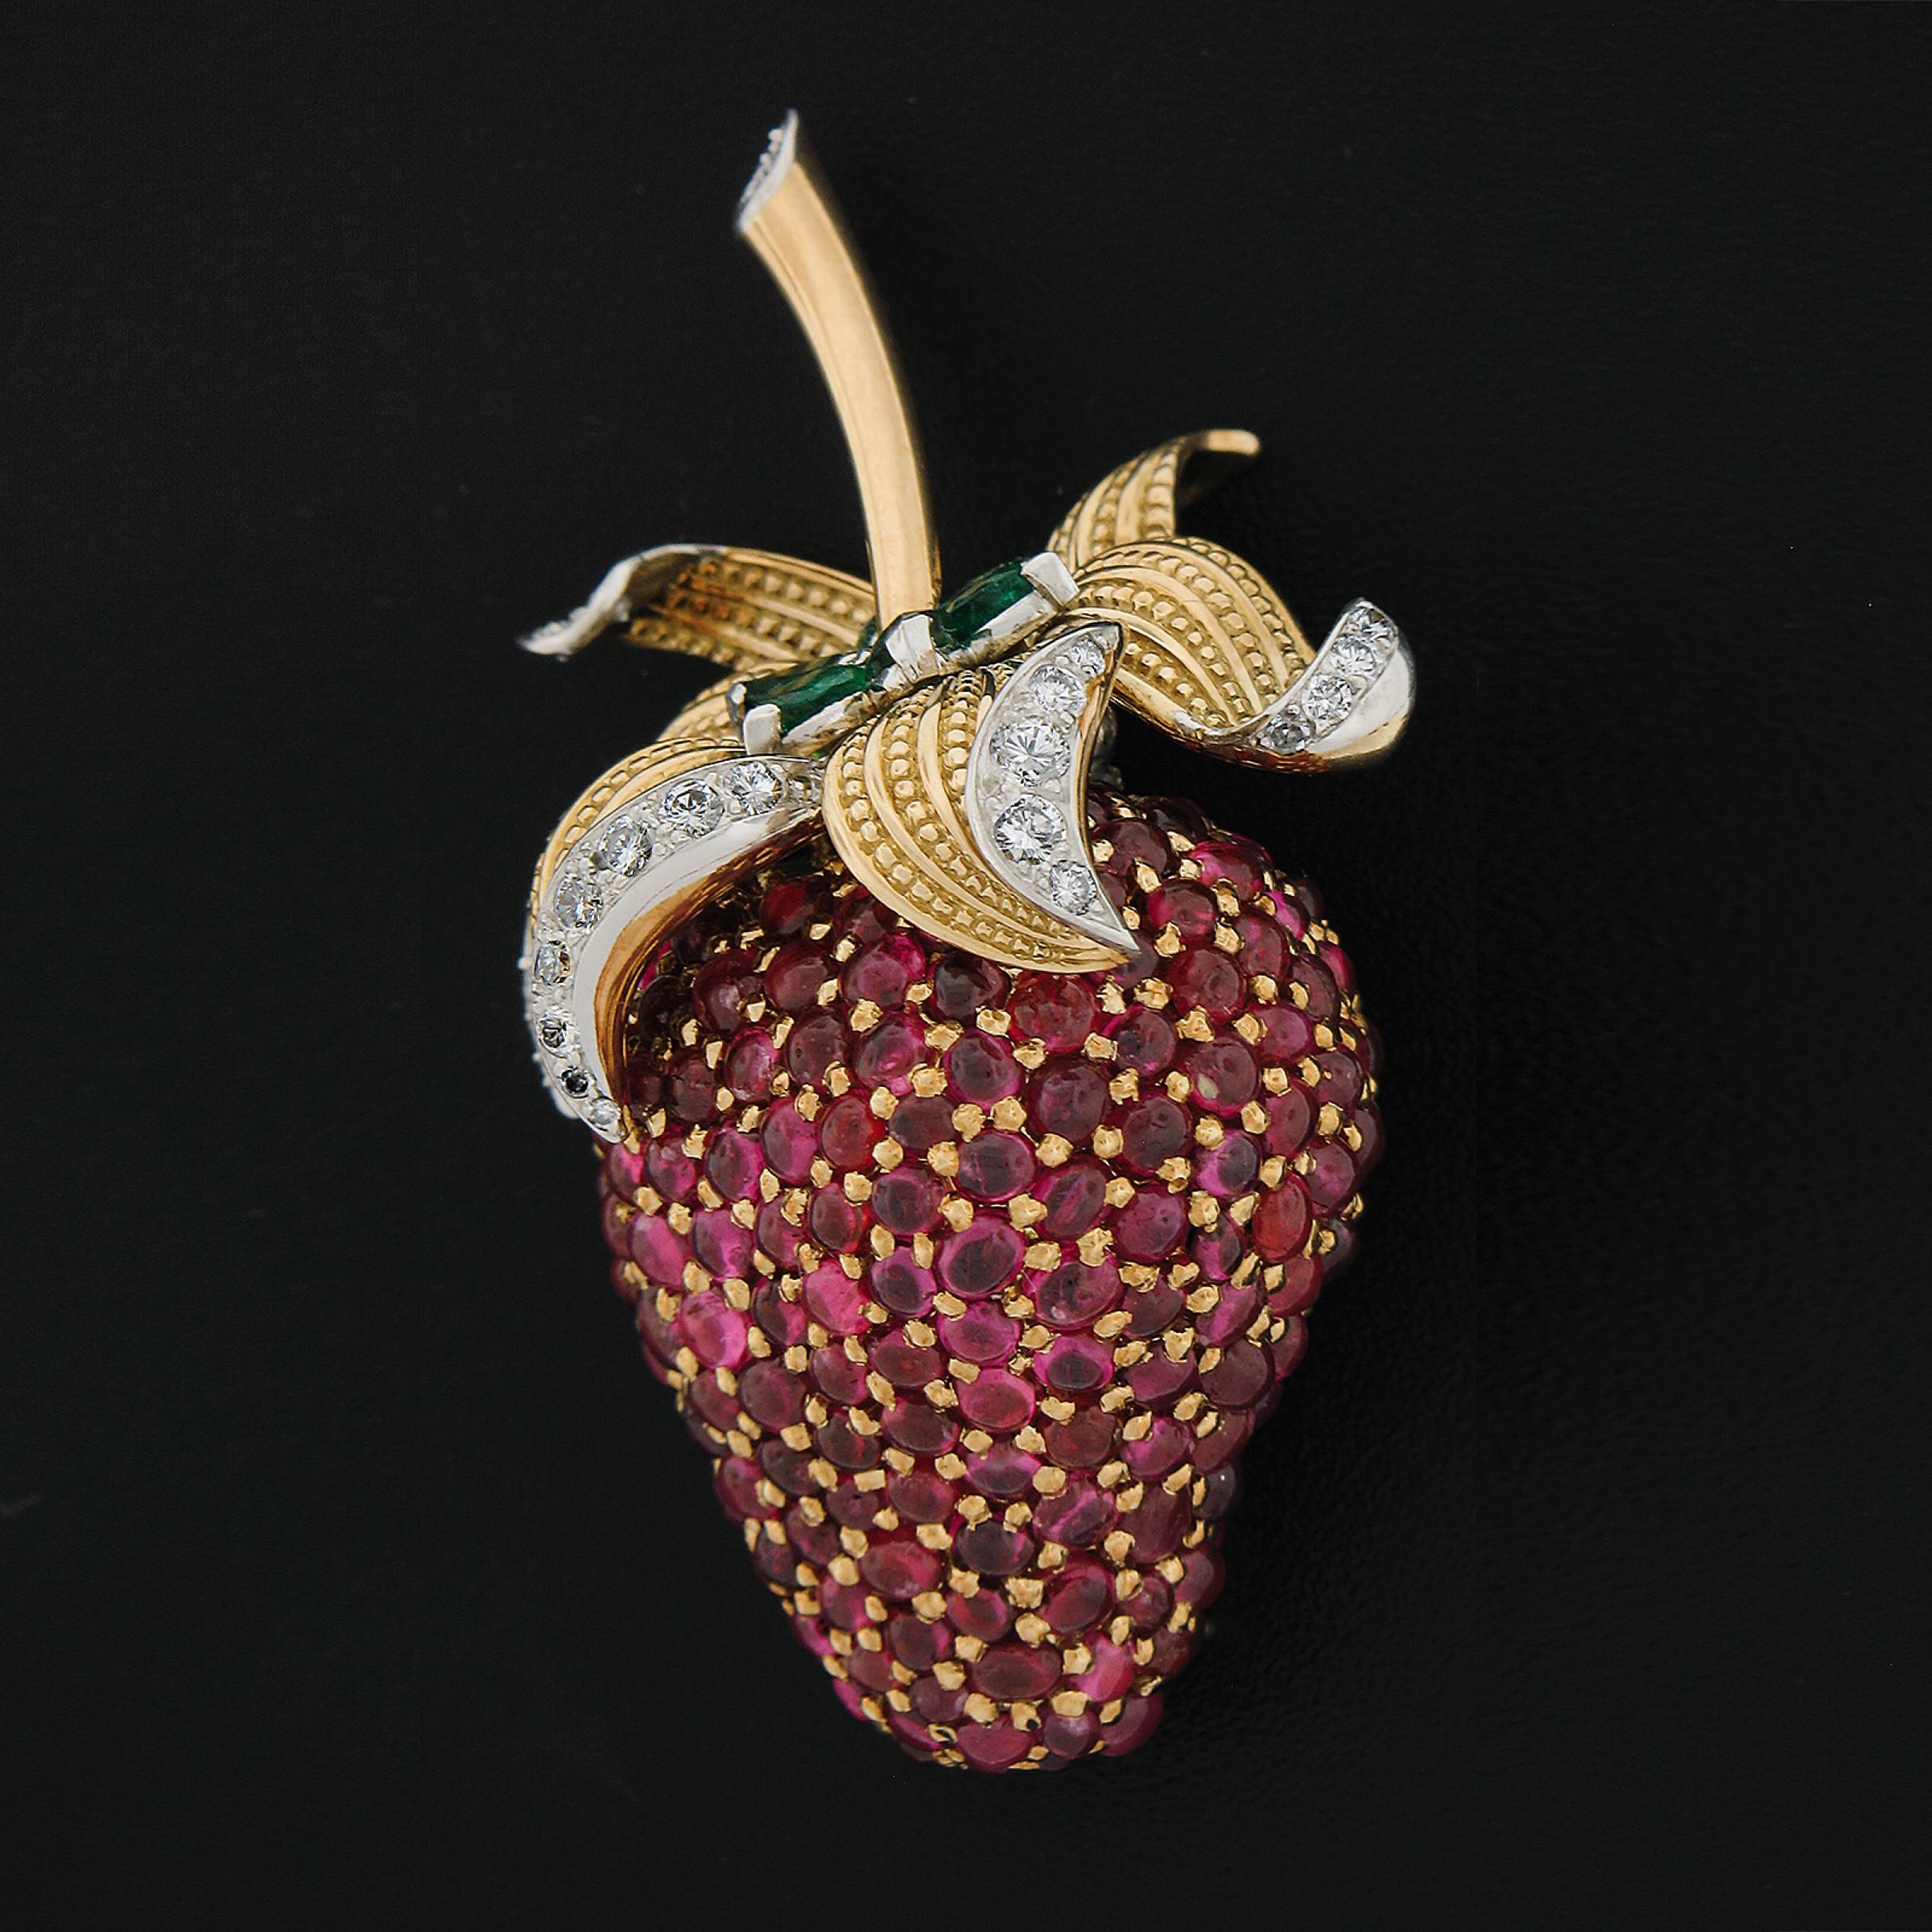 This truly magnificent vintage brooch that is very well crafted in solid yellow gold and platinum, features a truly jaw dropping strawberry design that is completely covered with top quality Burma rubies, emerald and diamonds throughout. Two of the